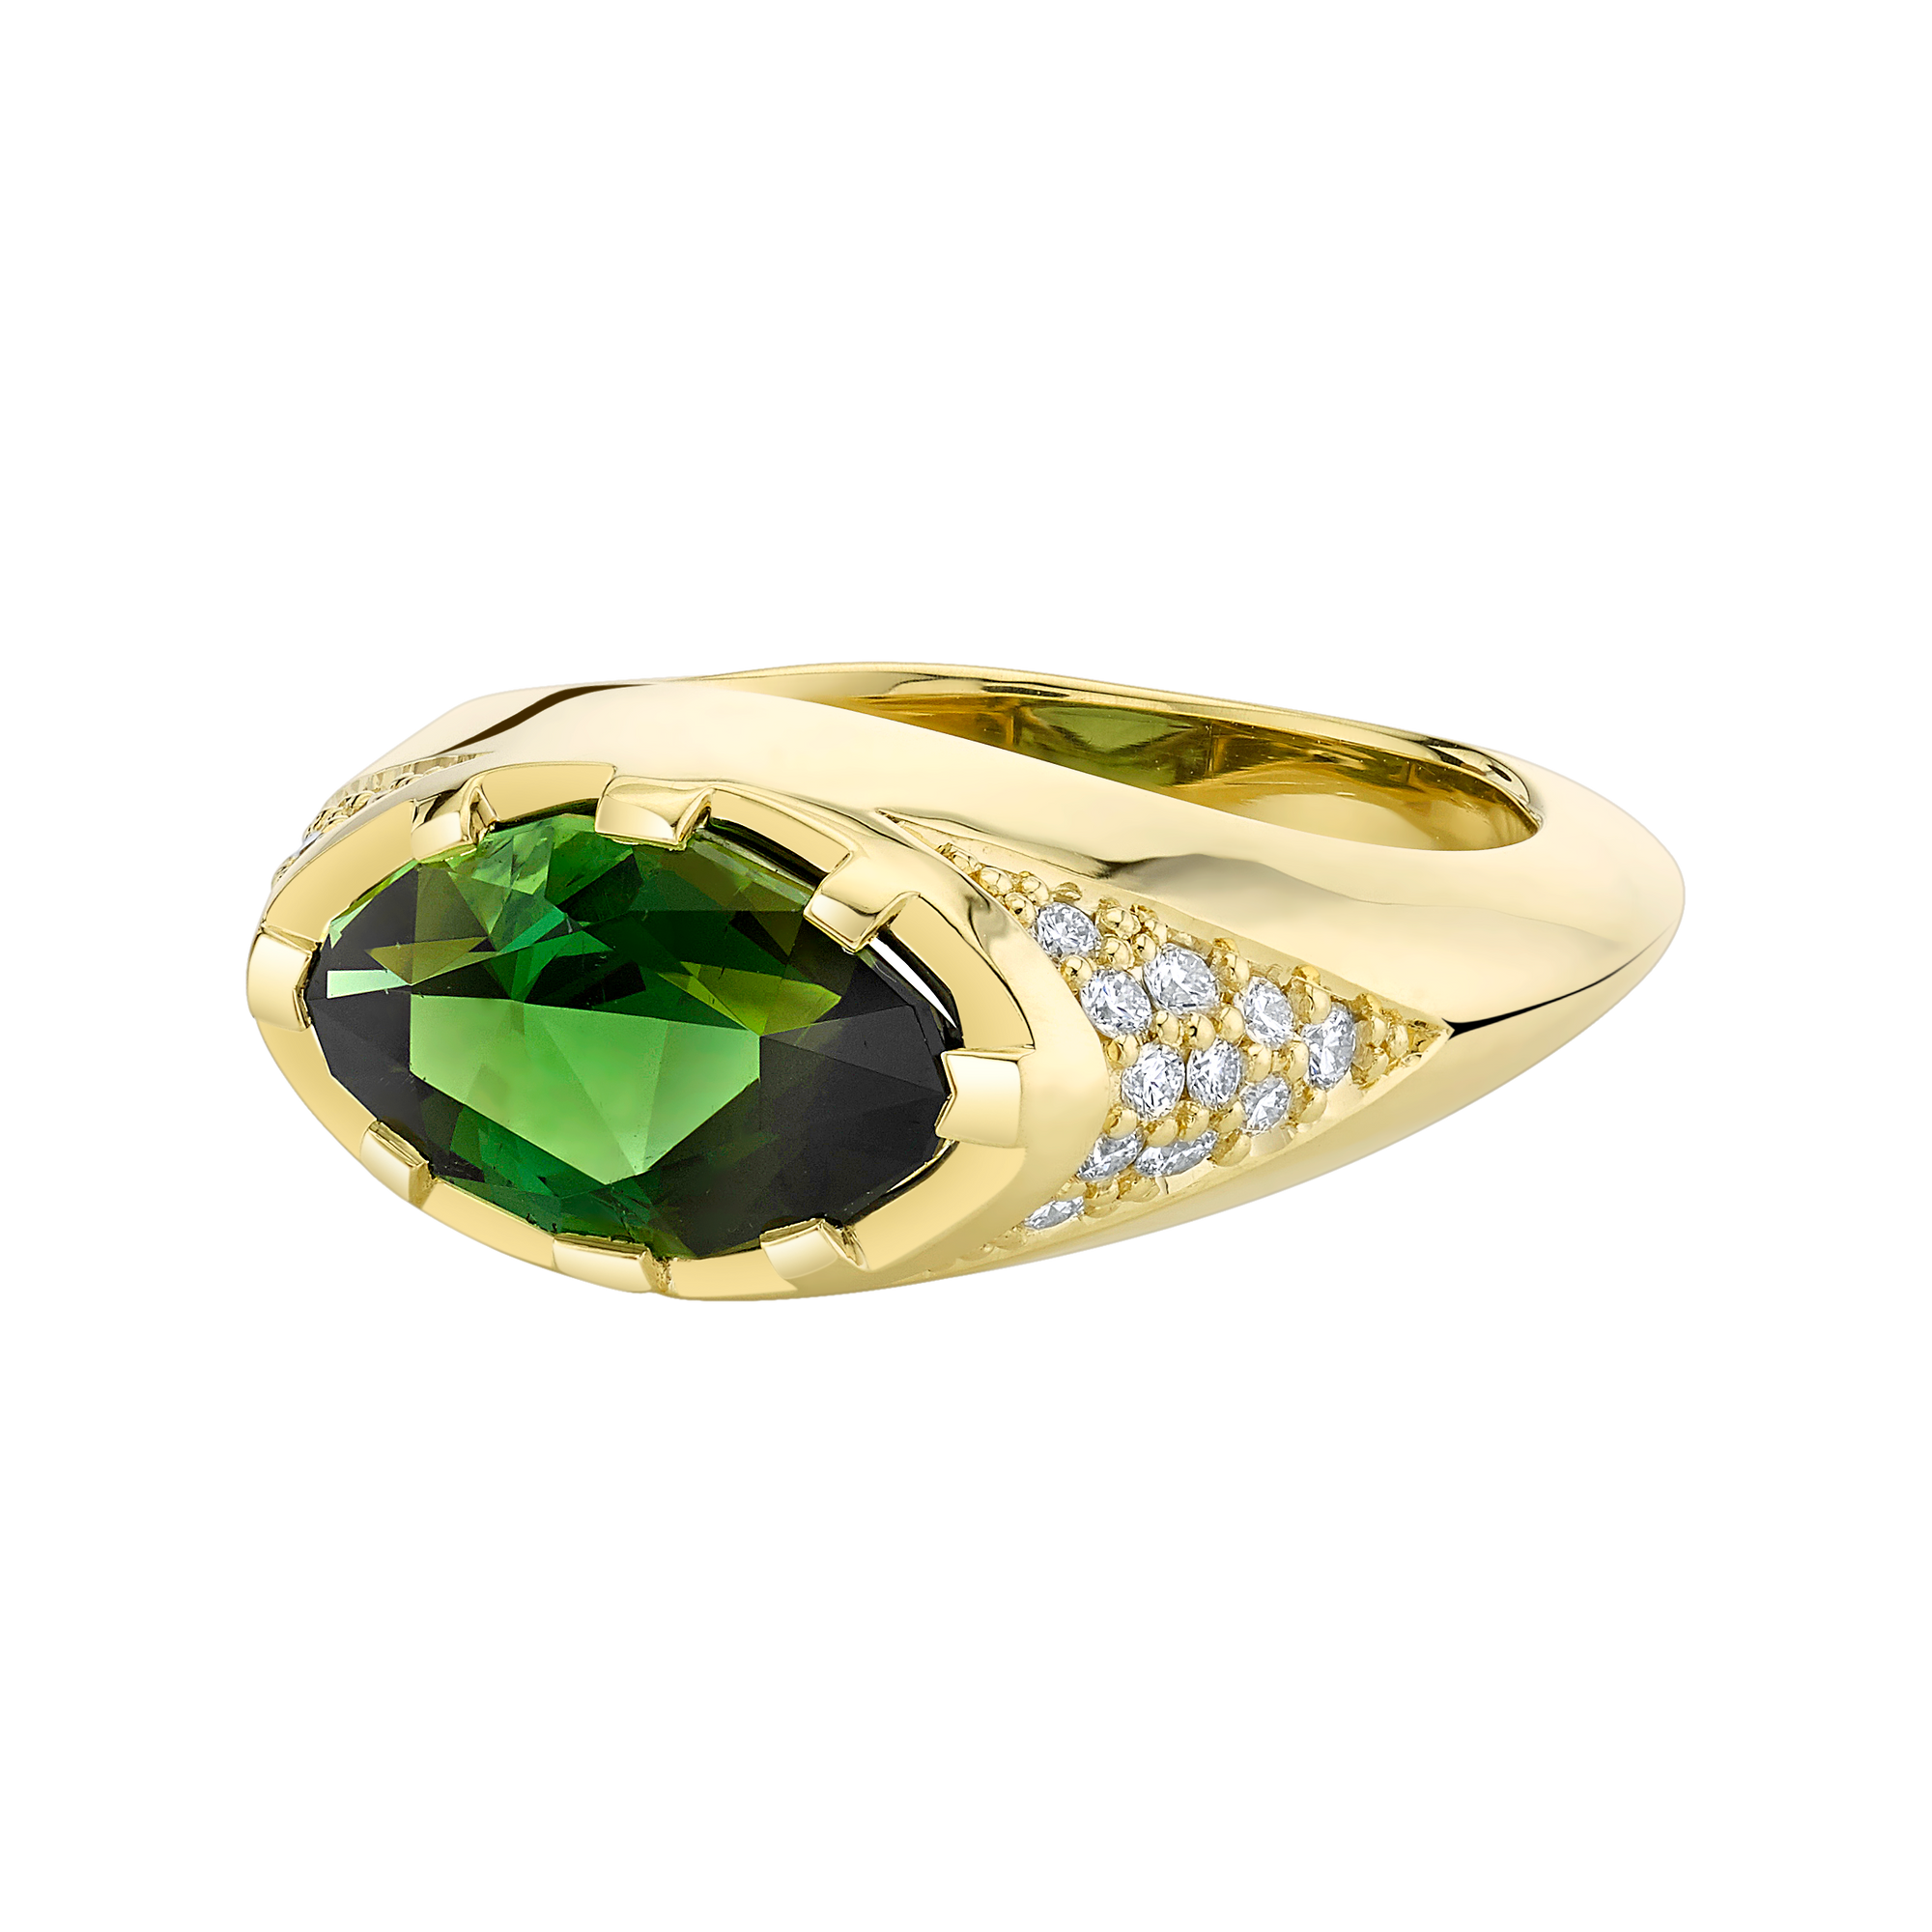 Primary Contrast Ring featuring a Precision-Cut Green Tourmaline with Diamond Pave